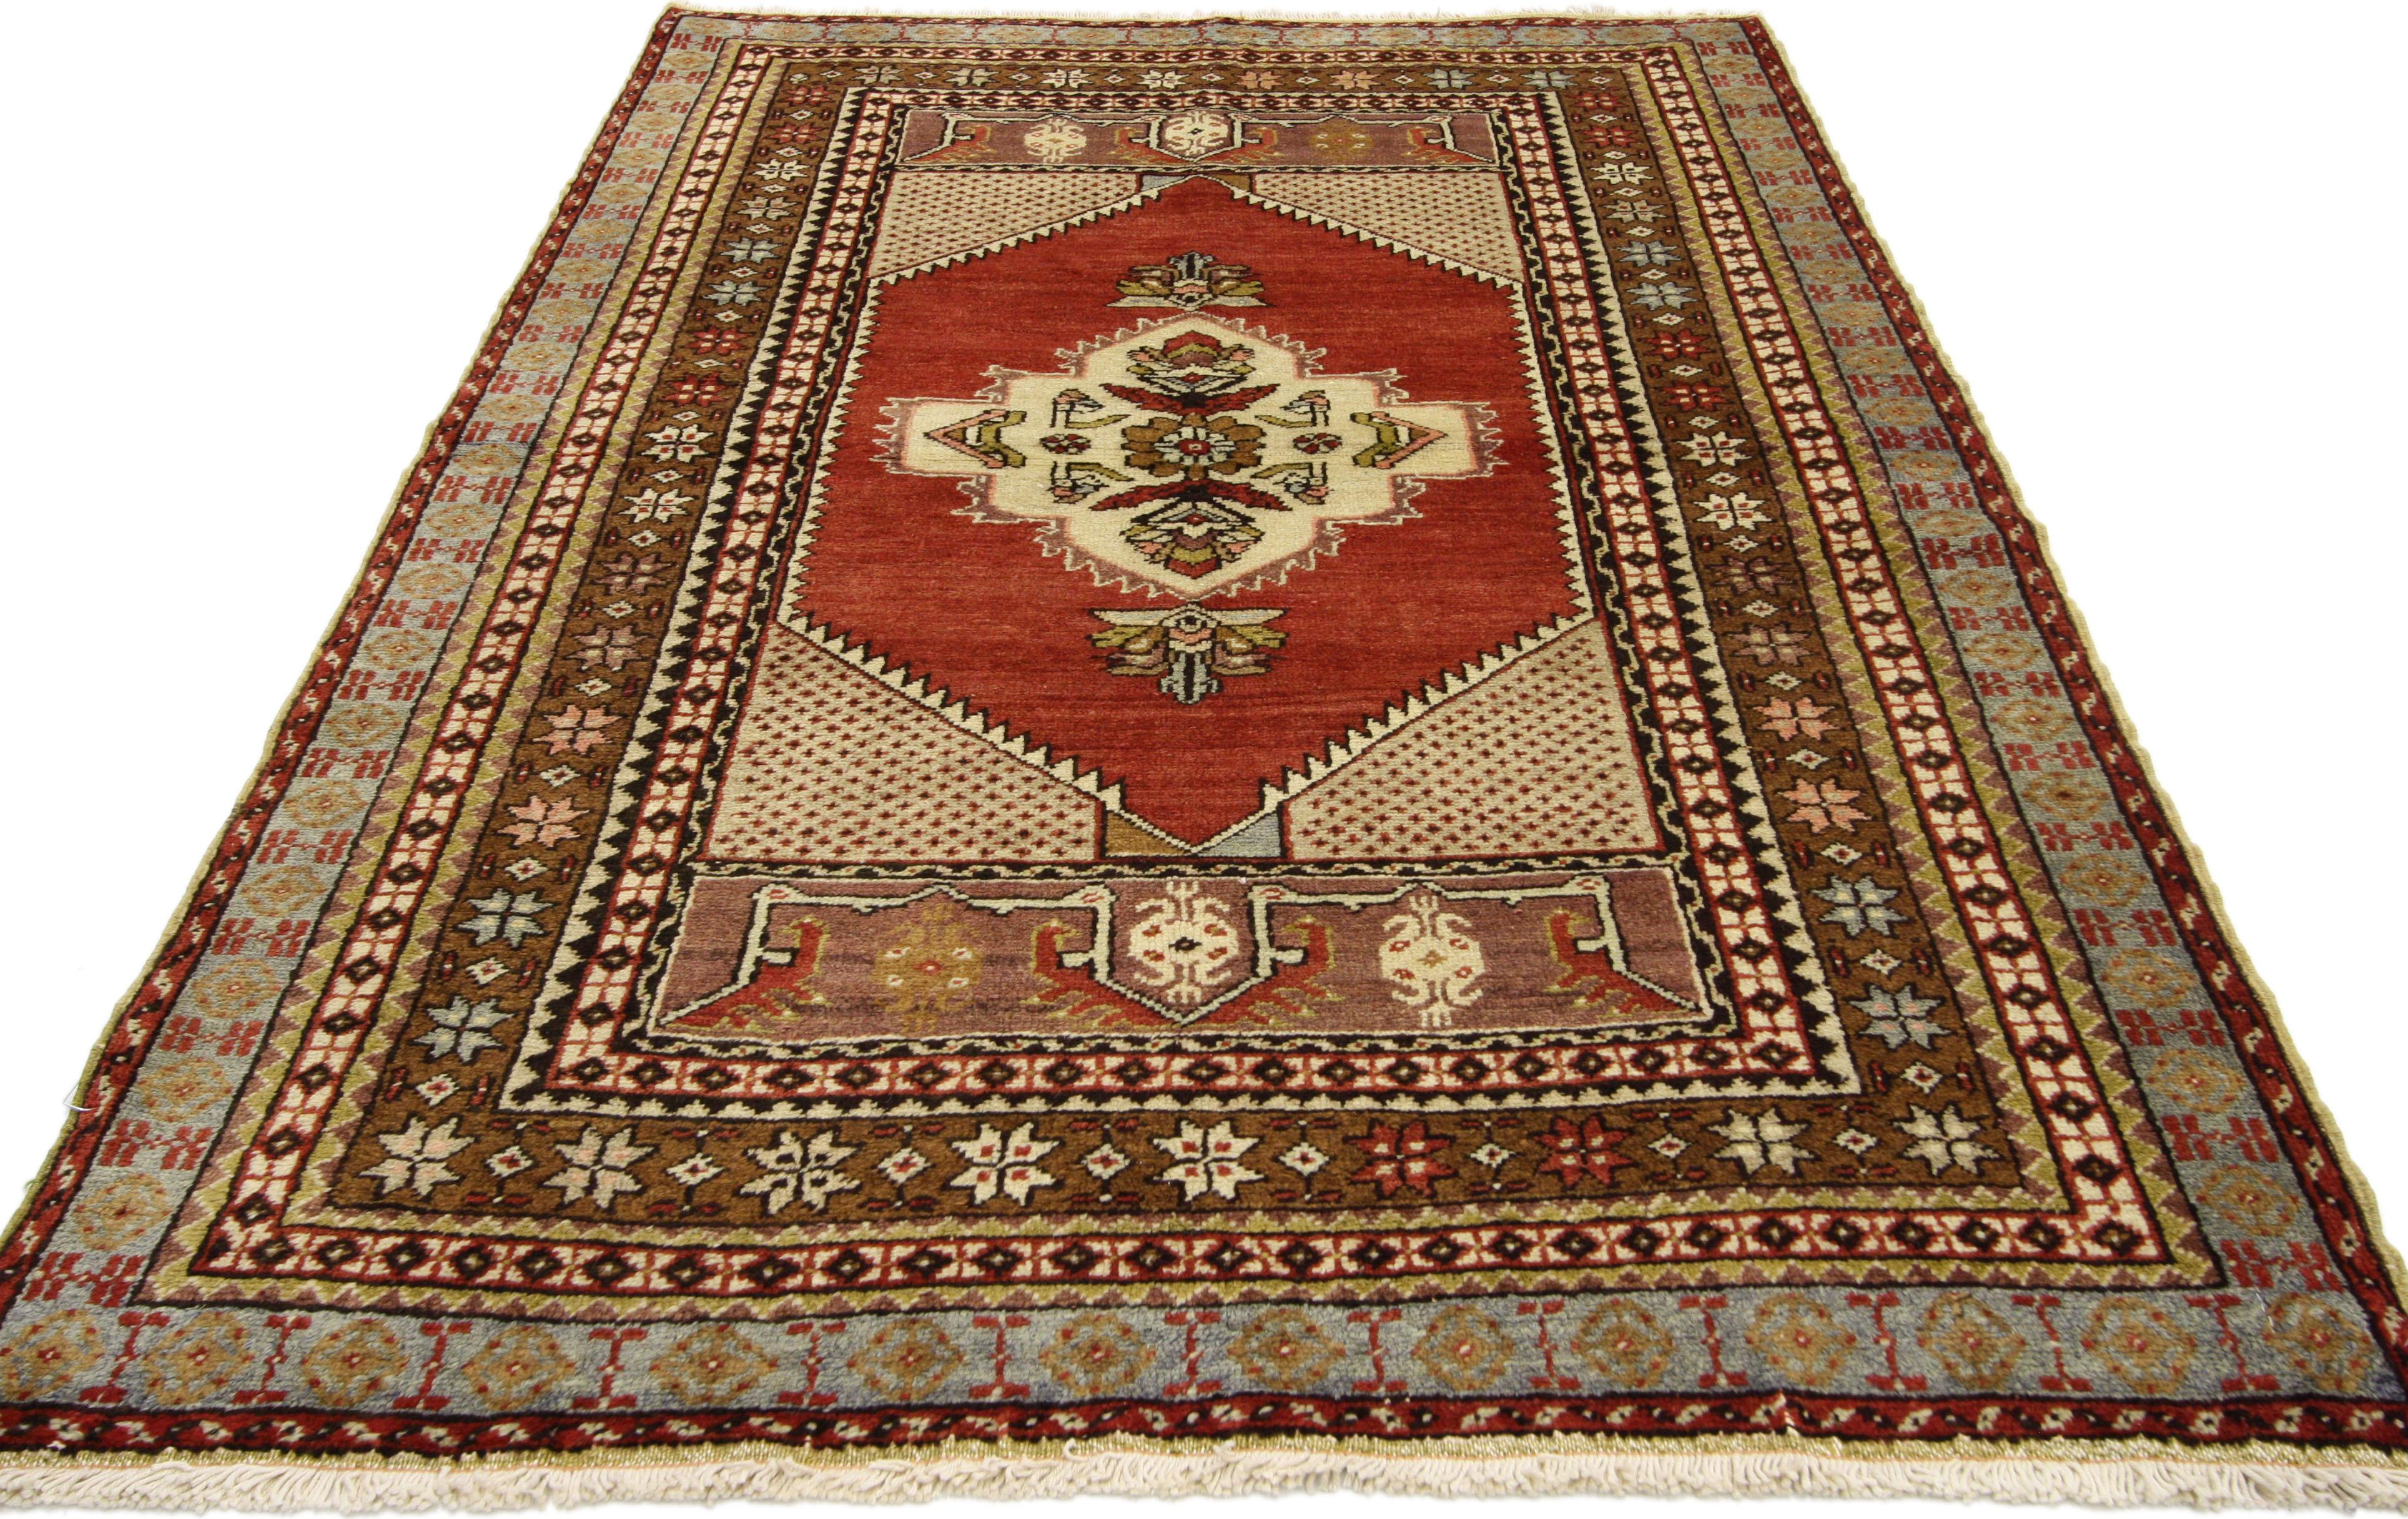 73848 Vintage Turkish Oushak rug, Entry or Foyer rug 03.09 X 05.10. This vintage Turkish Oushak rug features a modern traditional style. Immersed in Anatolian history and refined colors, this vintage Turkish Oushak rug combines simplicity with